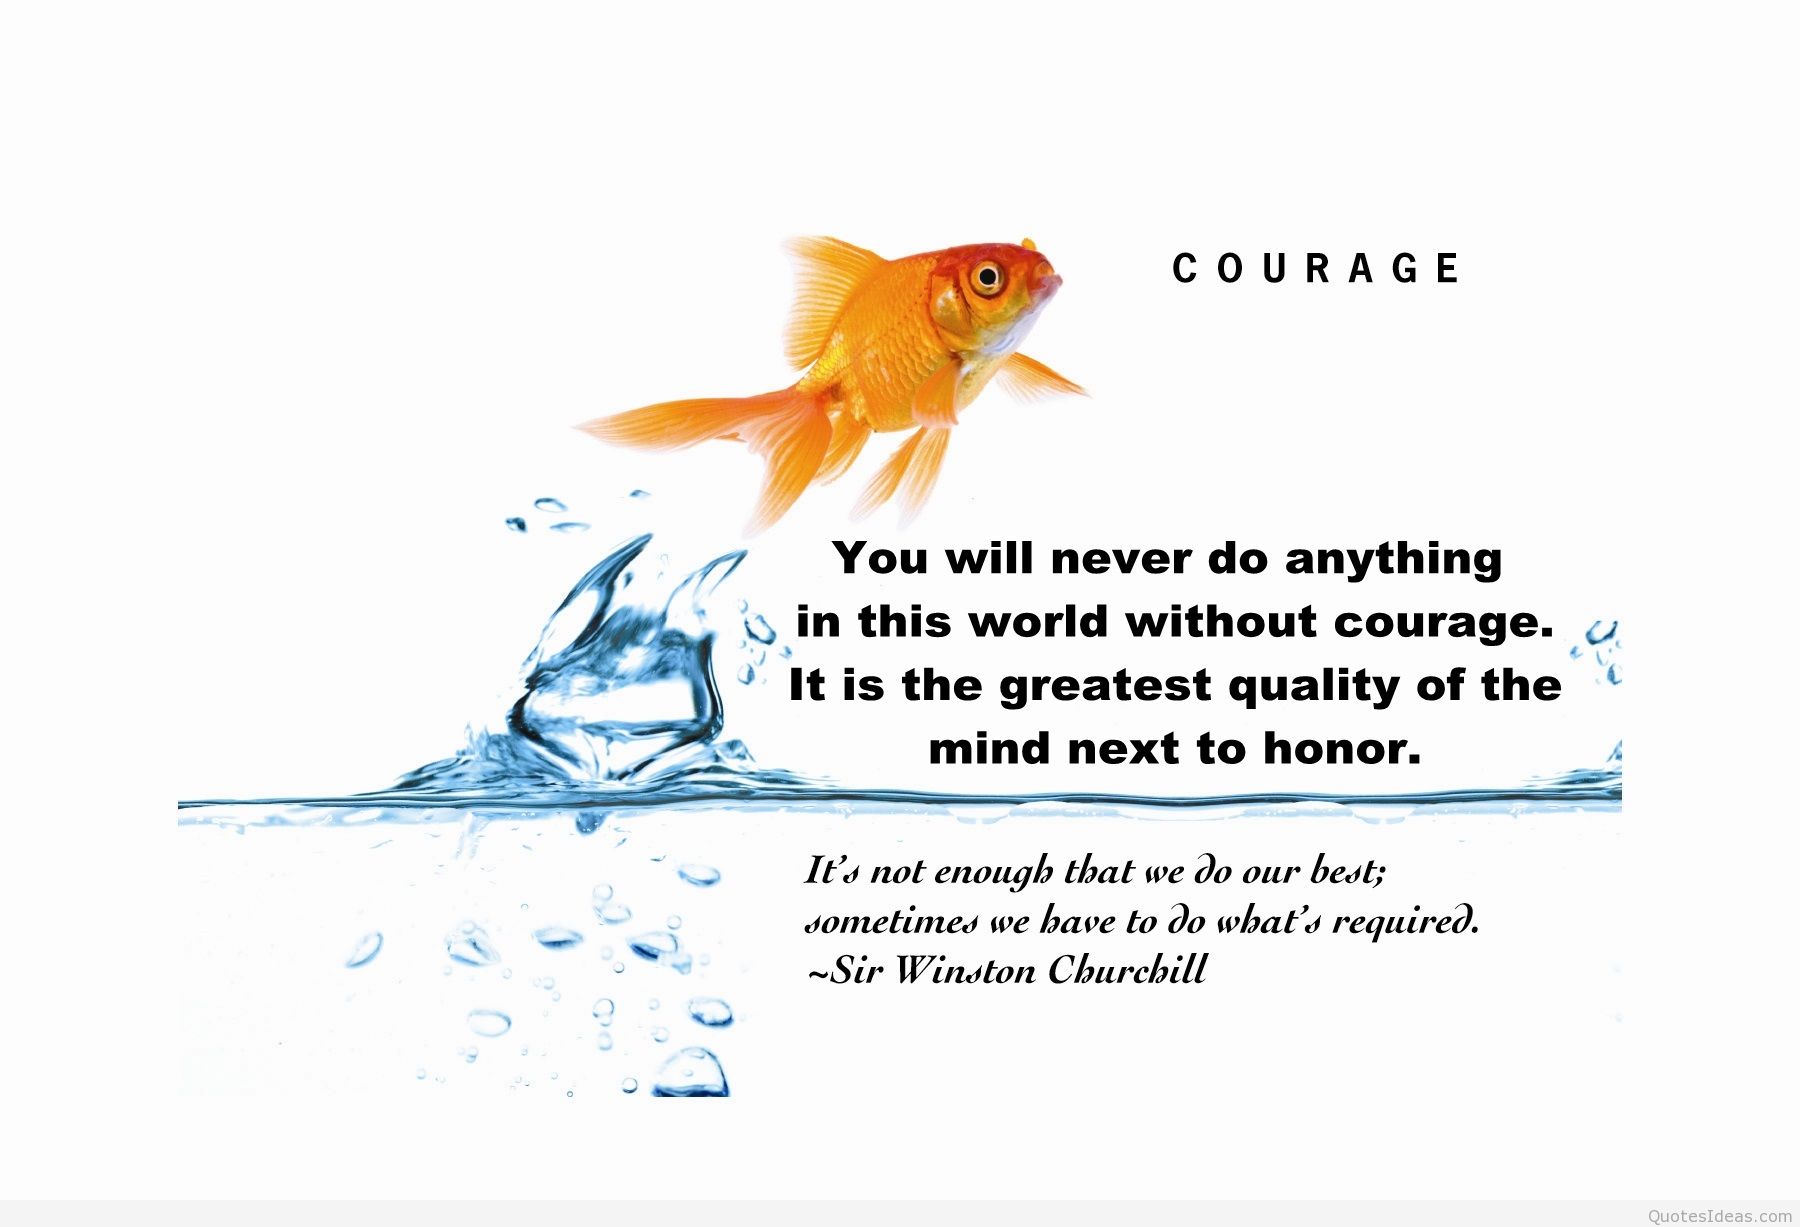 Courage hd quote wallpaper